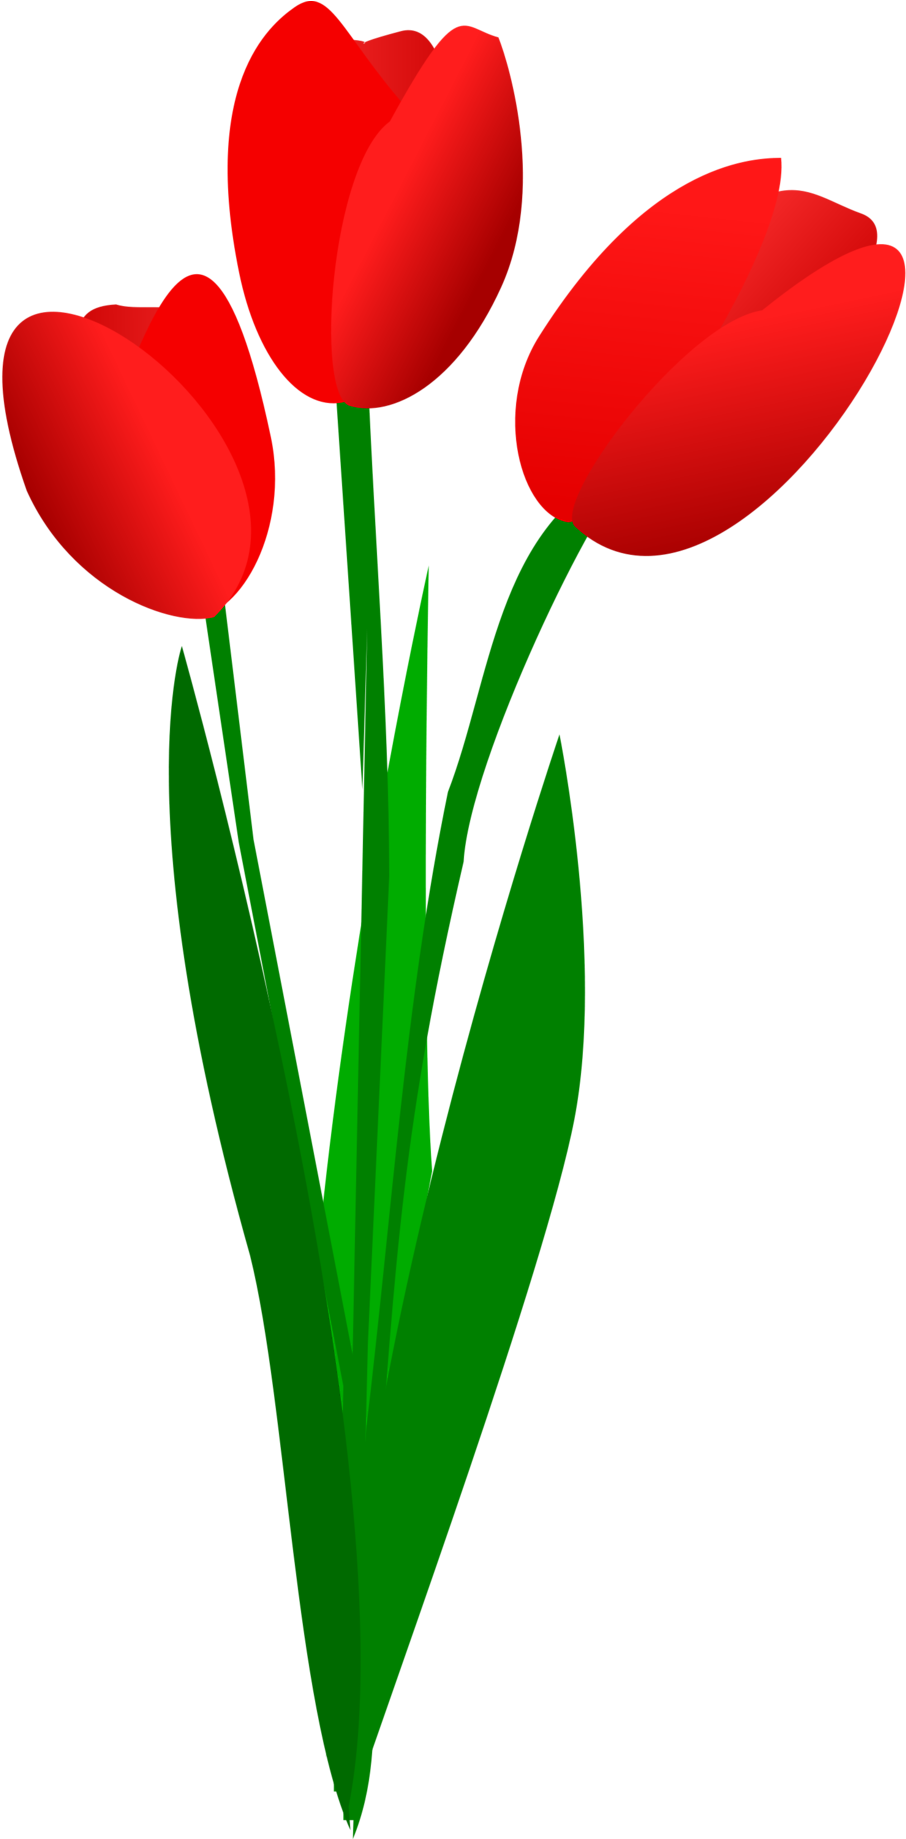 Red Tulips Vector Illustration PNG image